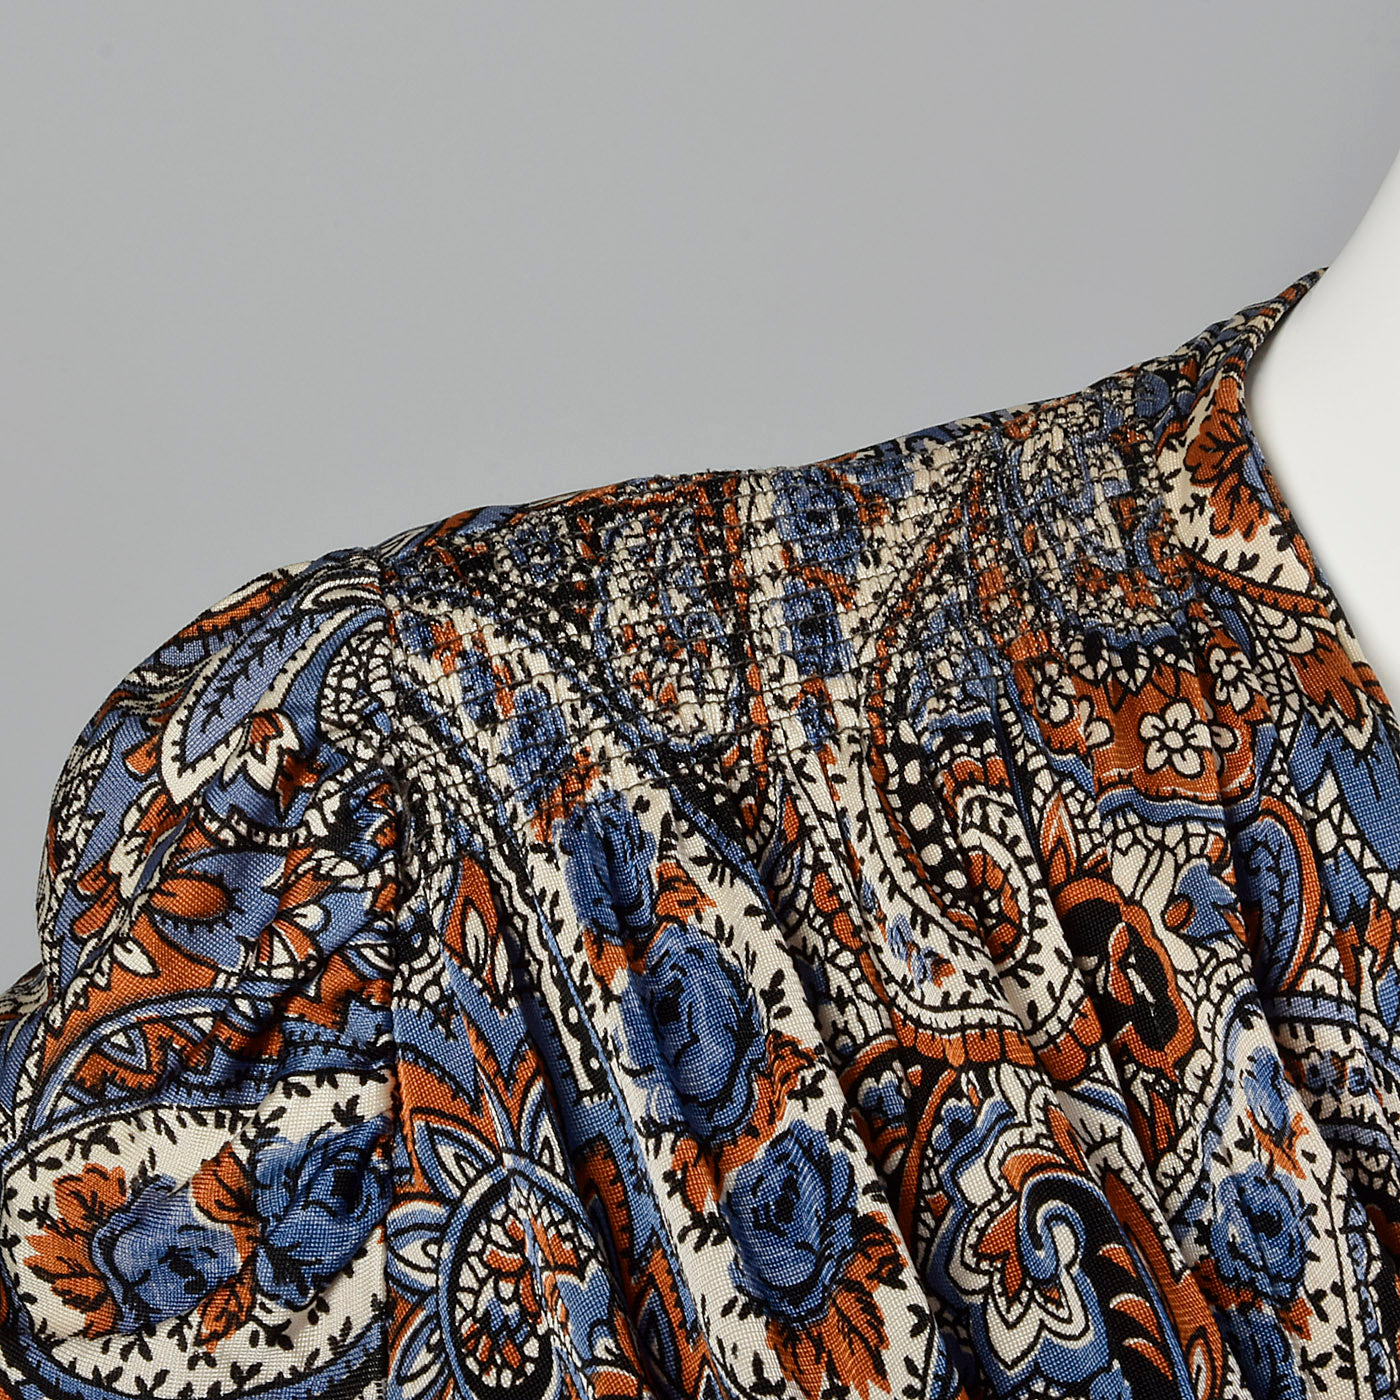 1940s Paisley Print Dress in Jersey Knit